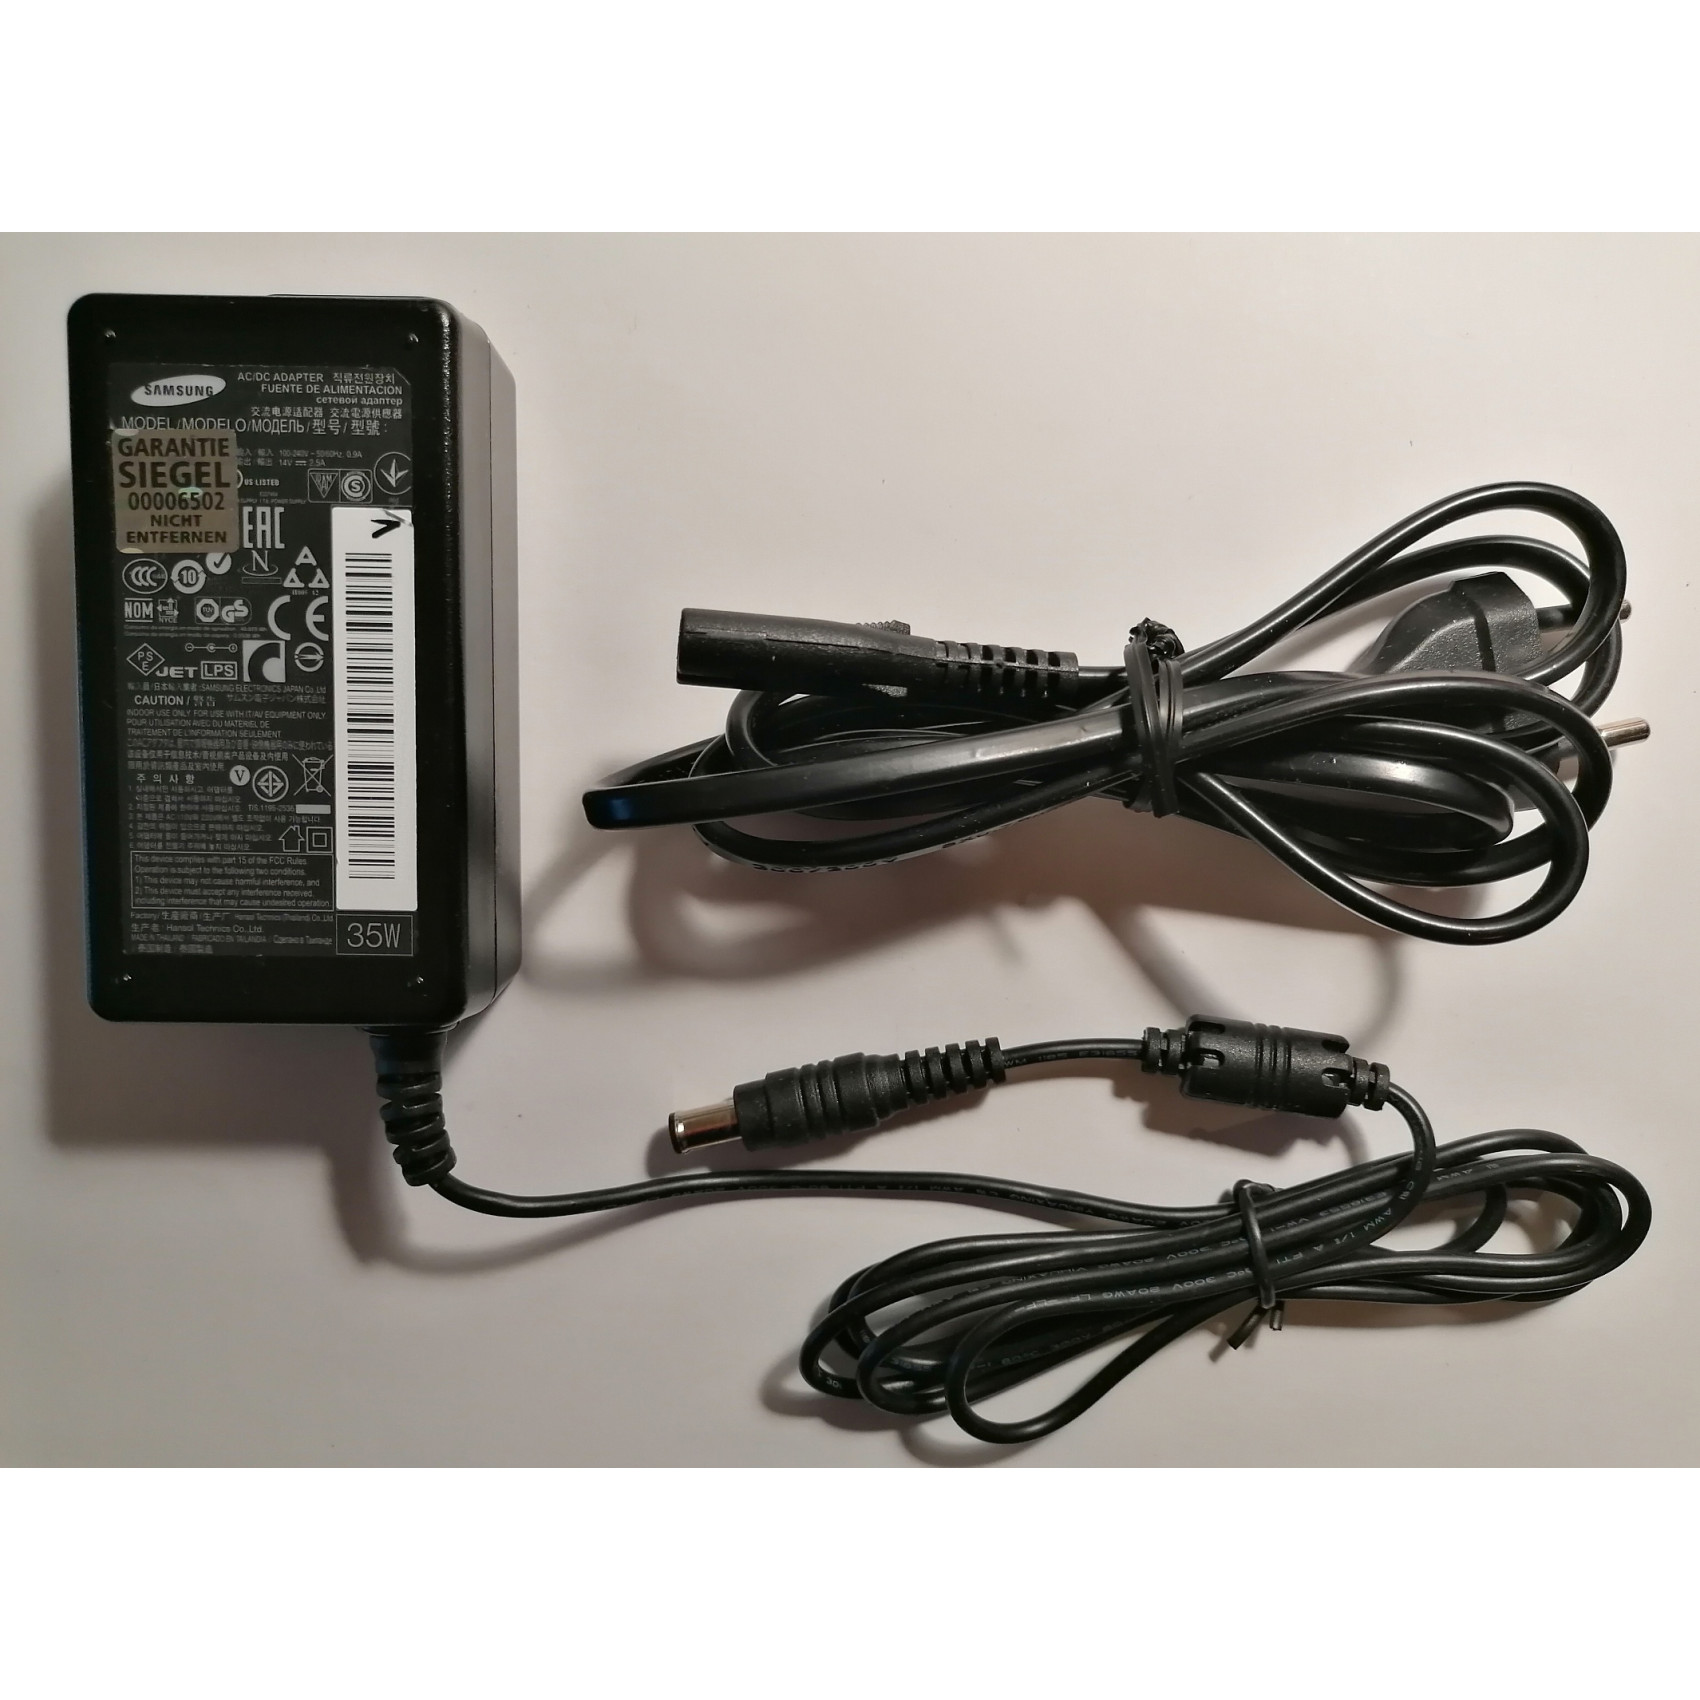 AC Adapter For Samsung Odyssey G3 Series 24” 27” 32” Gaming